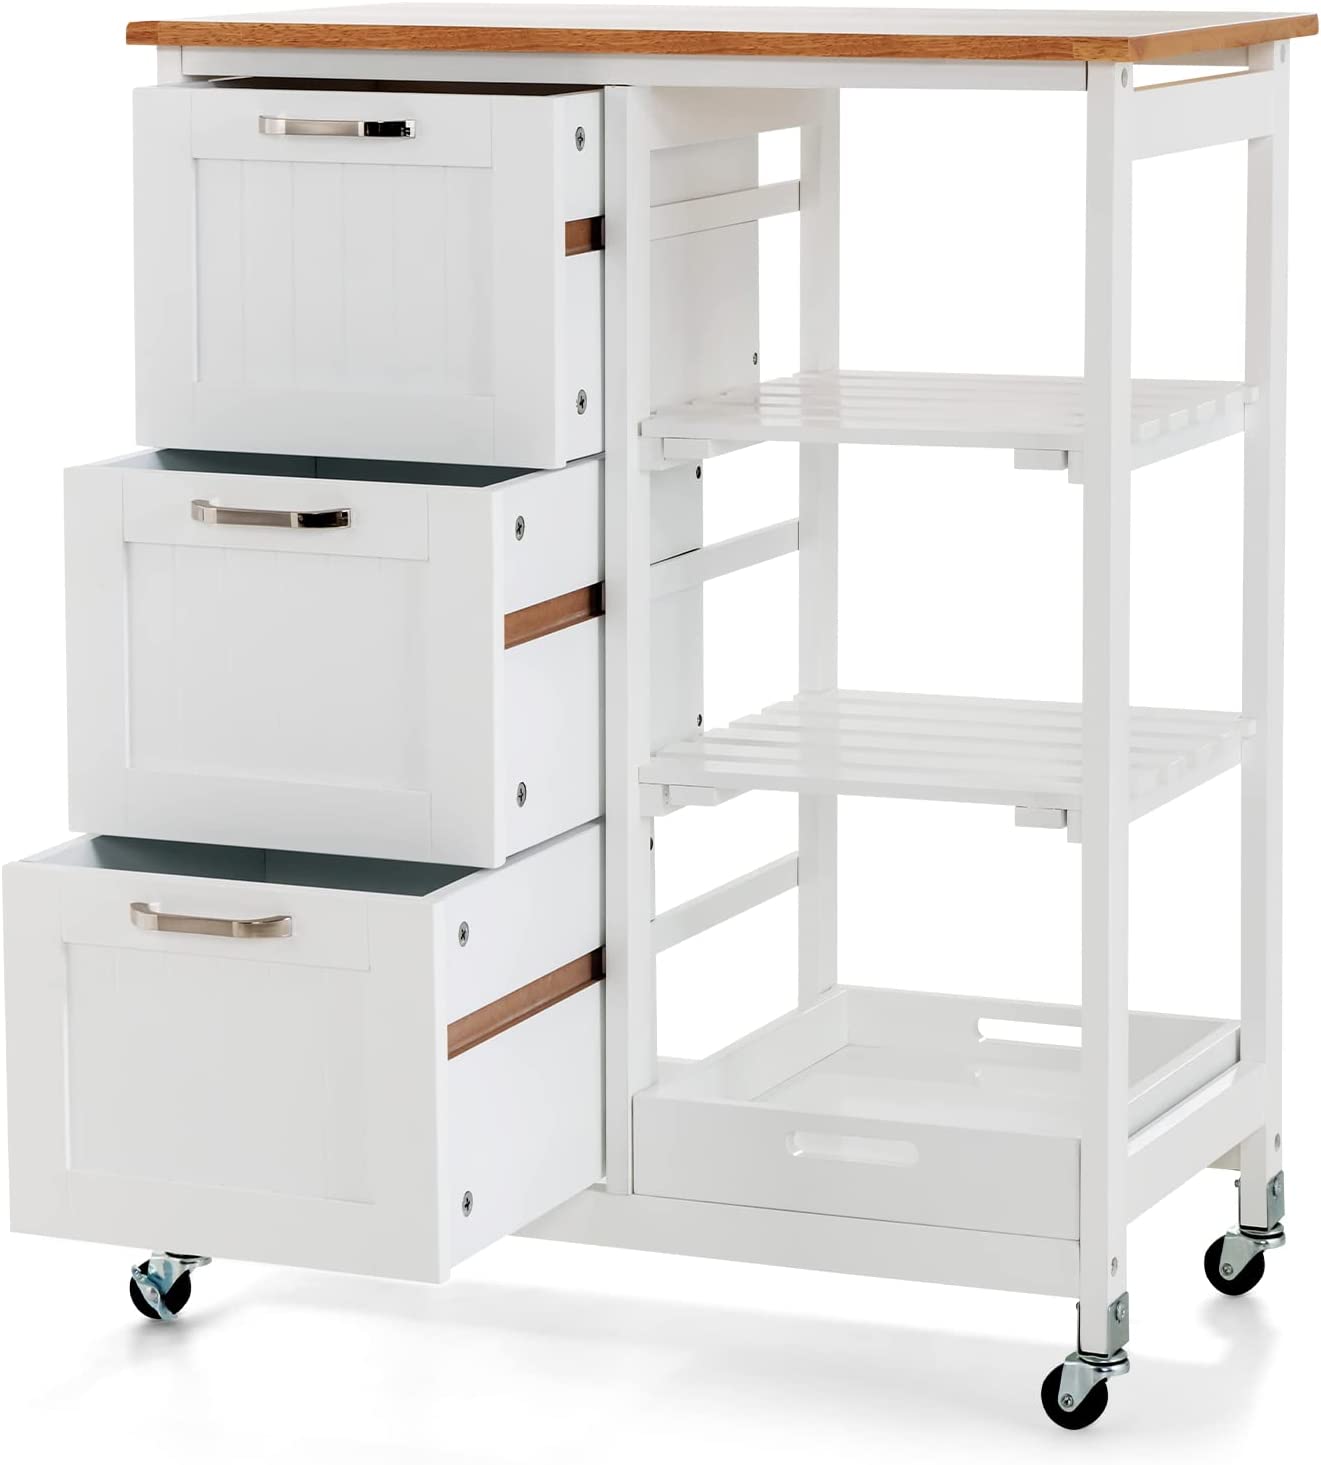 Giantex Kitchen Island Cart with Storage, Bar Serving Cart on Wheels with 3 Deep Drawers